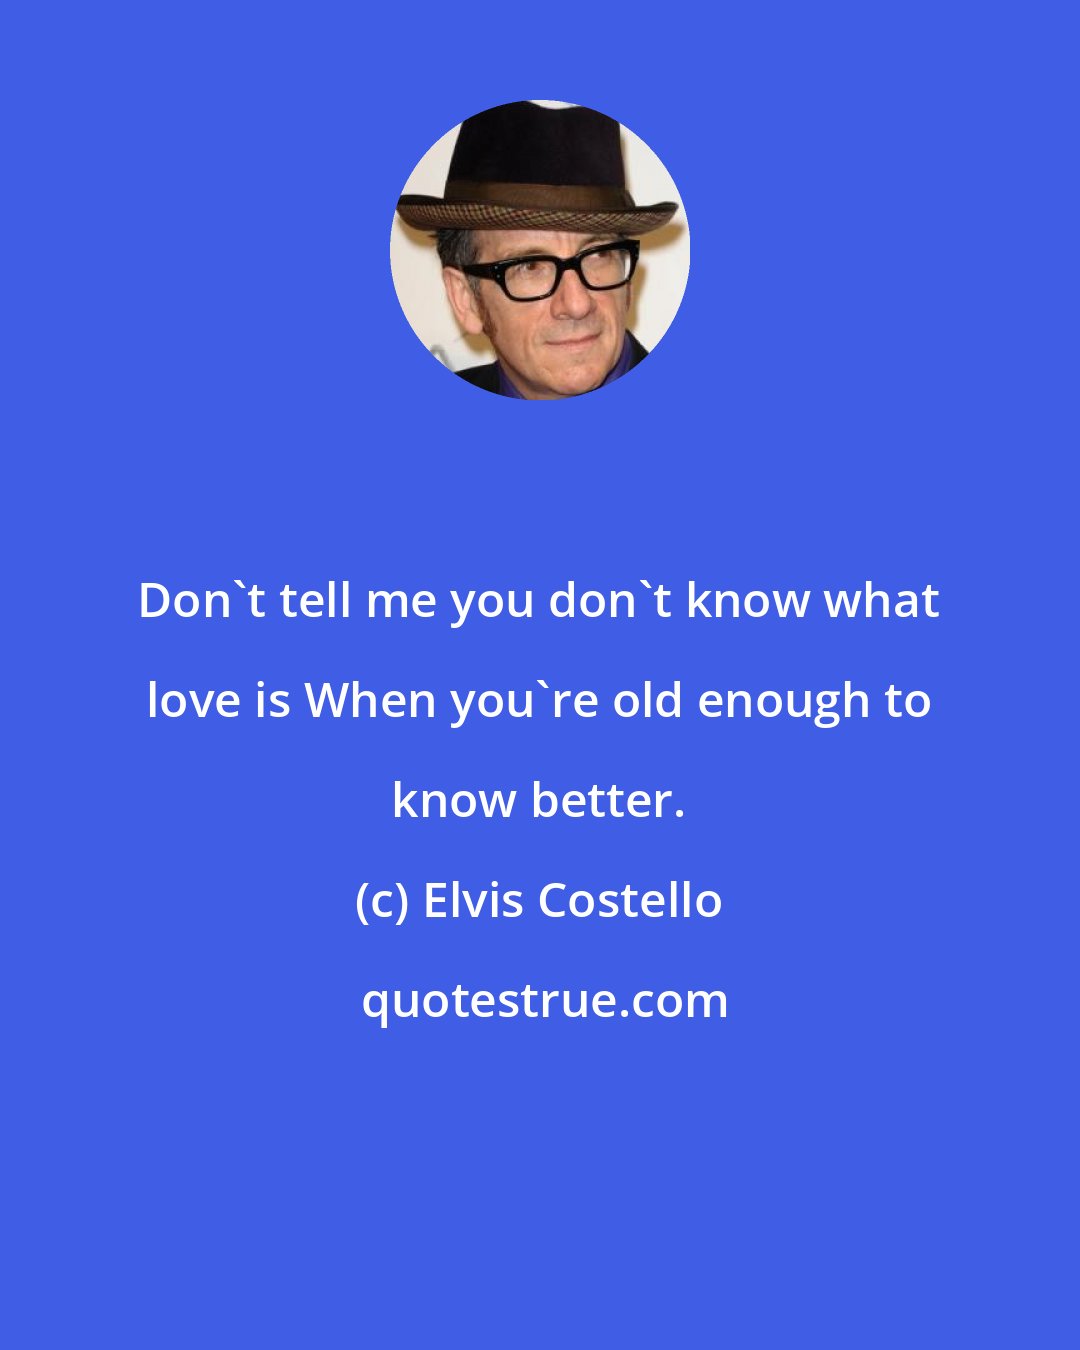 Elvis Costello: Don't tell me you don't know what love is When you're old enough to know better.